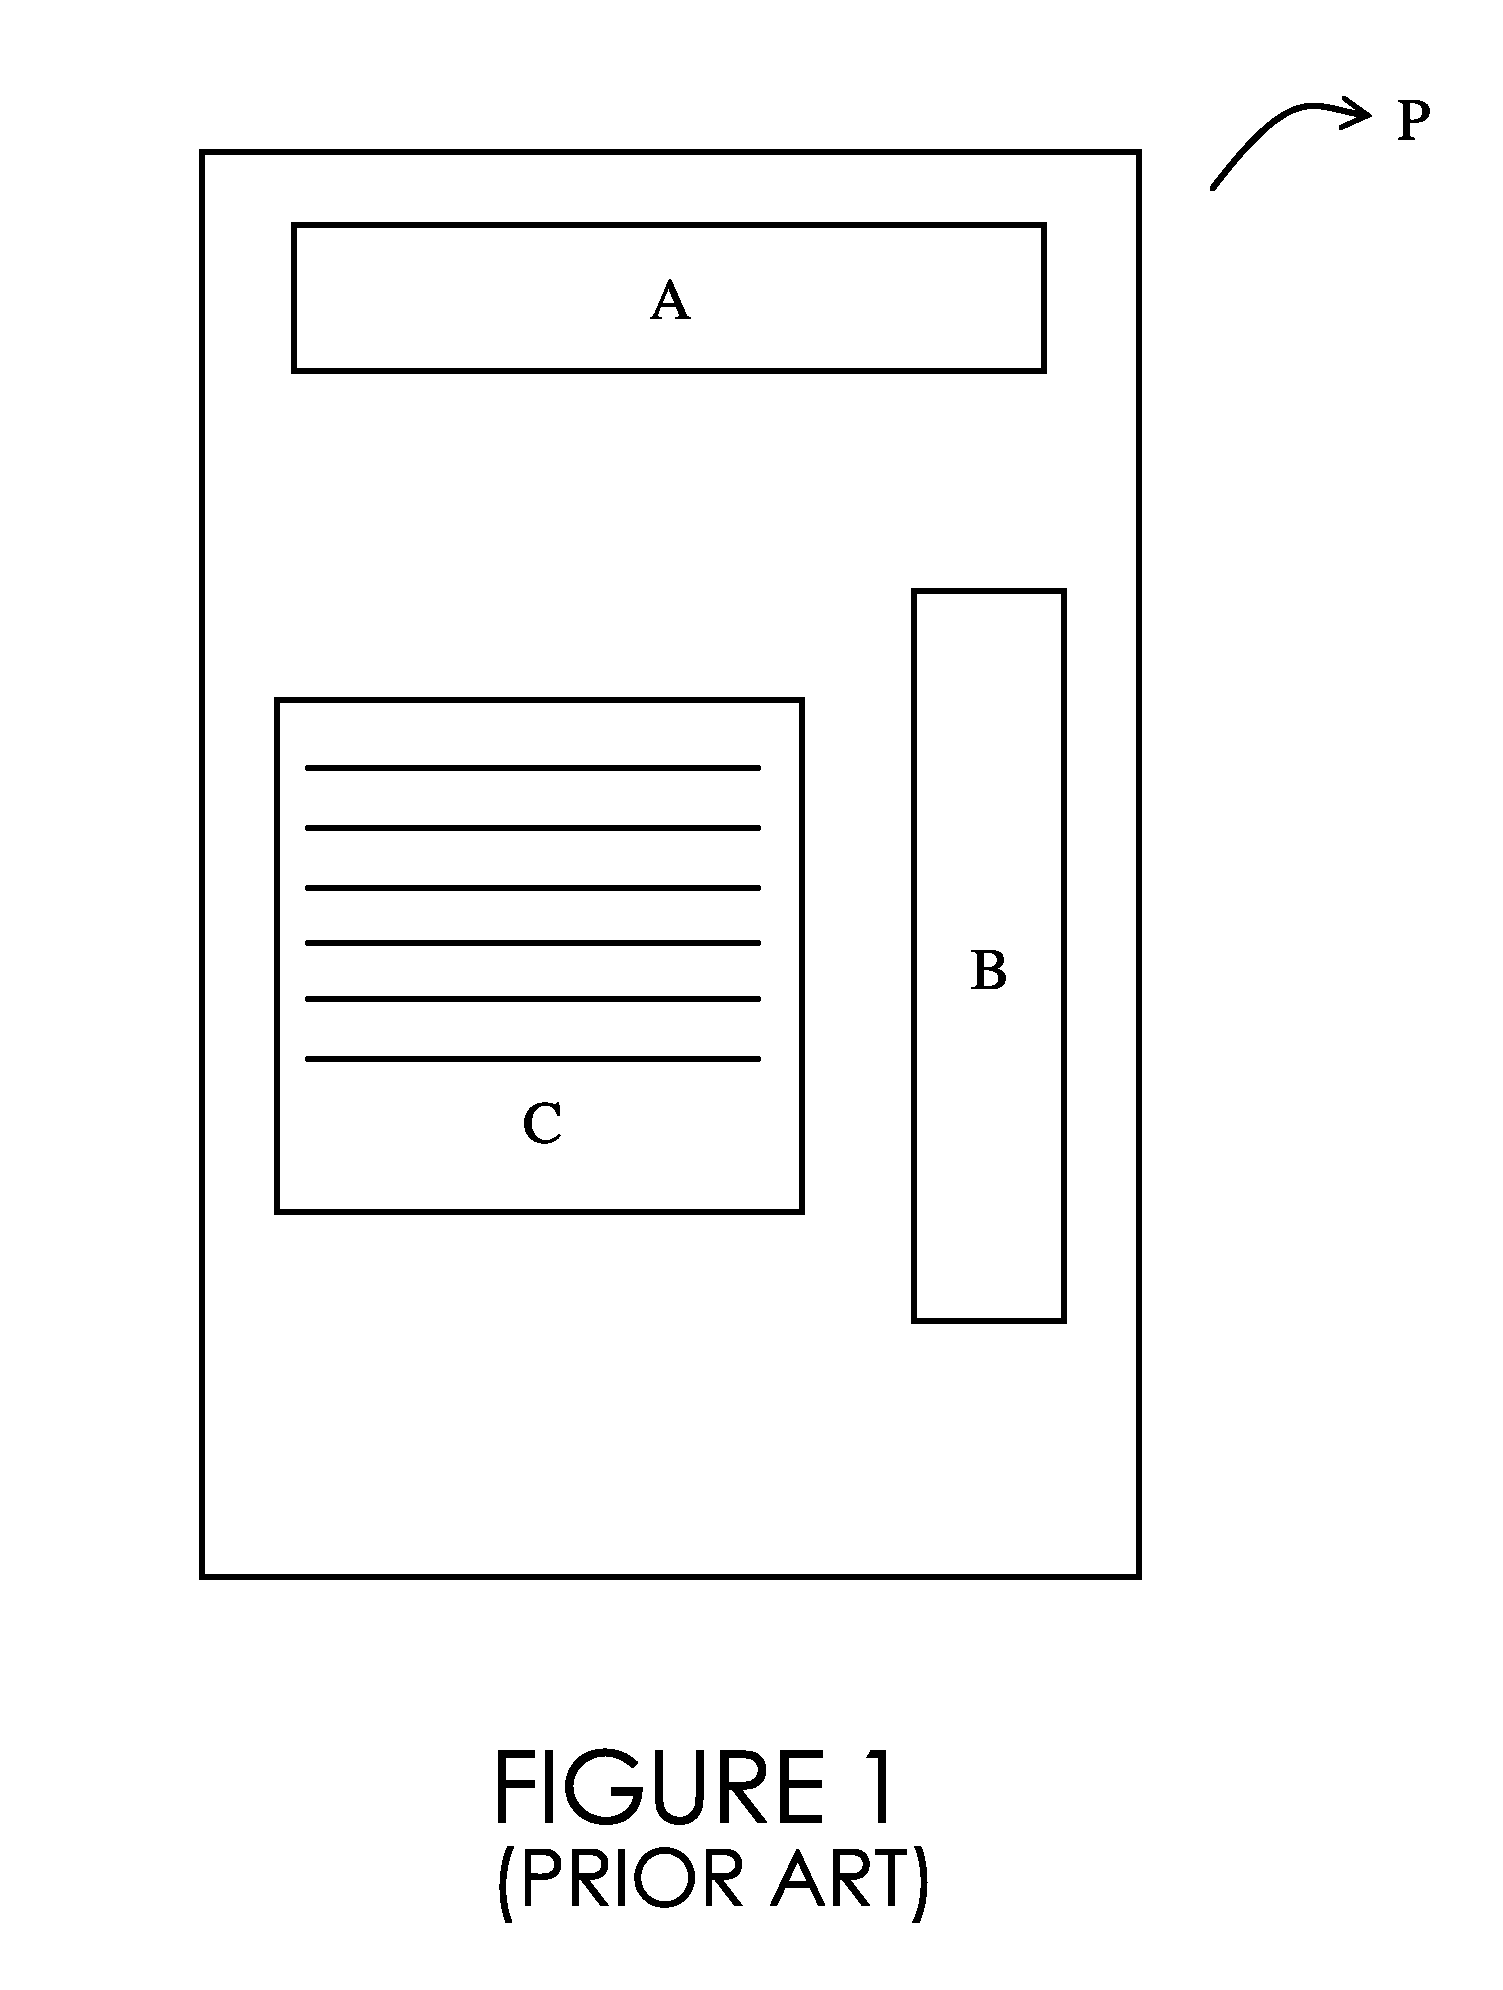 Method and System for Determining Overall Content Values for Content Elements in a Web Network and for Optimizing Internet Traffic Flow Through the Web Network